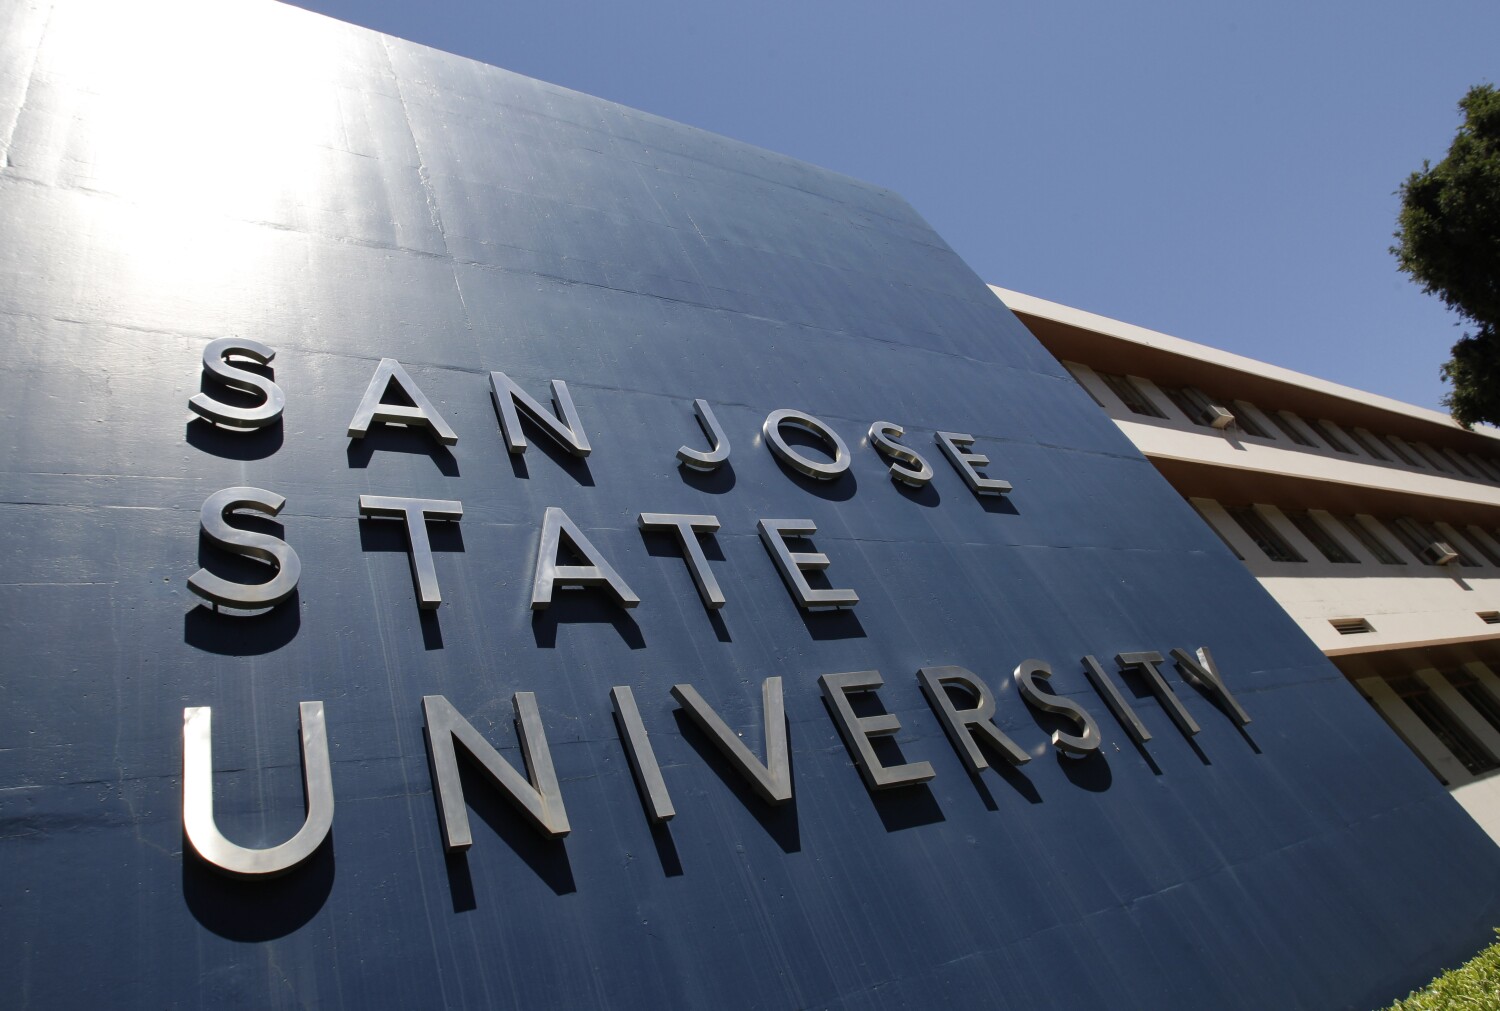 San Jose State president to resign after investigation into athlete sex abuse allegations